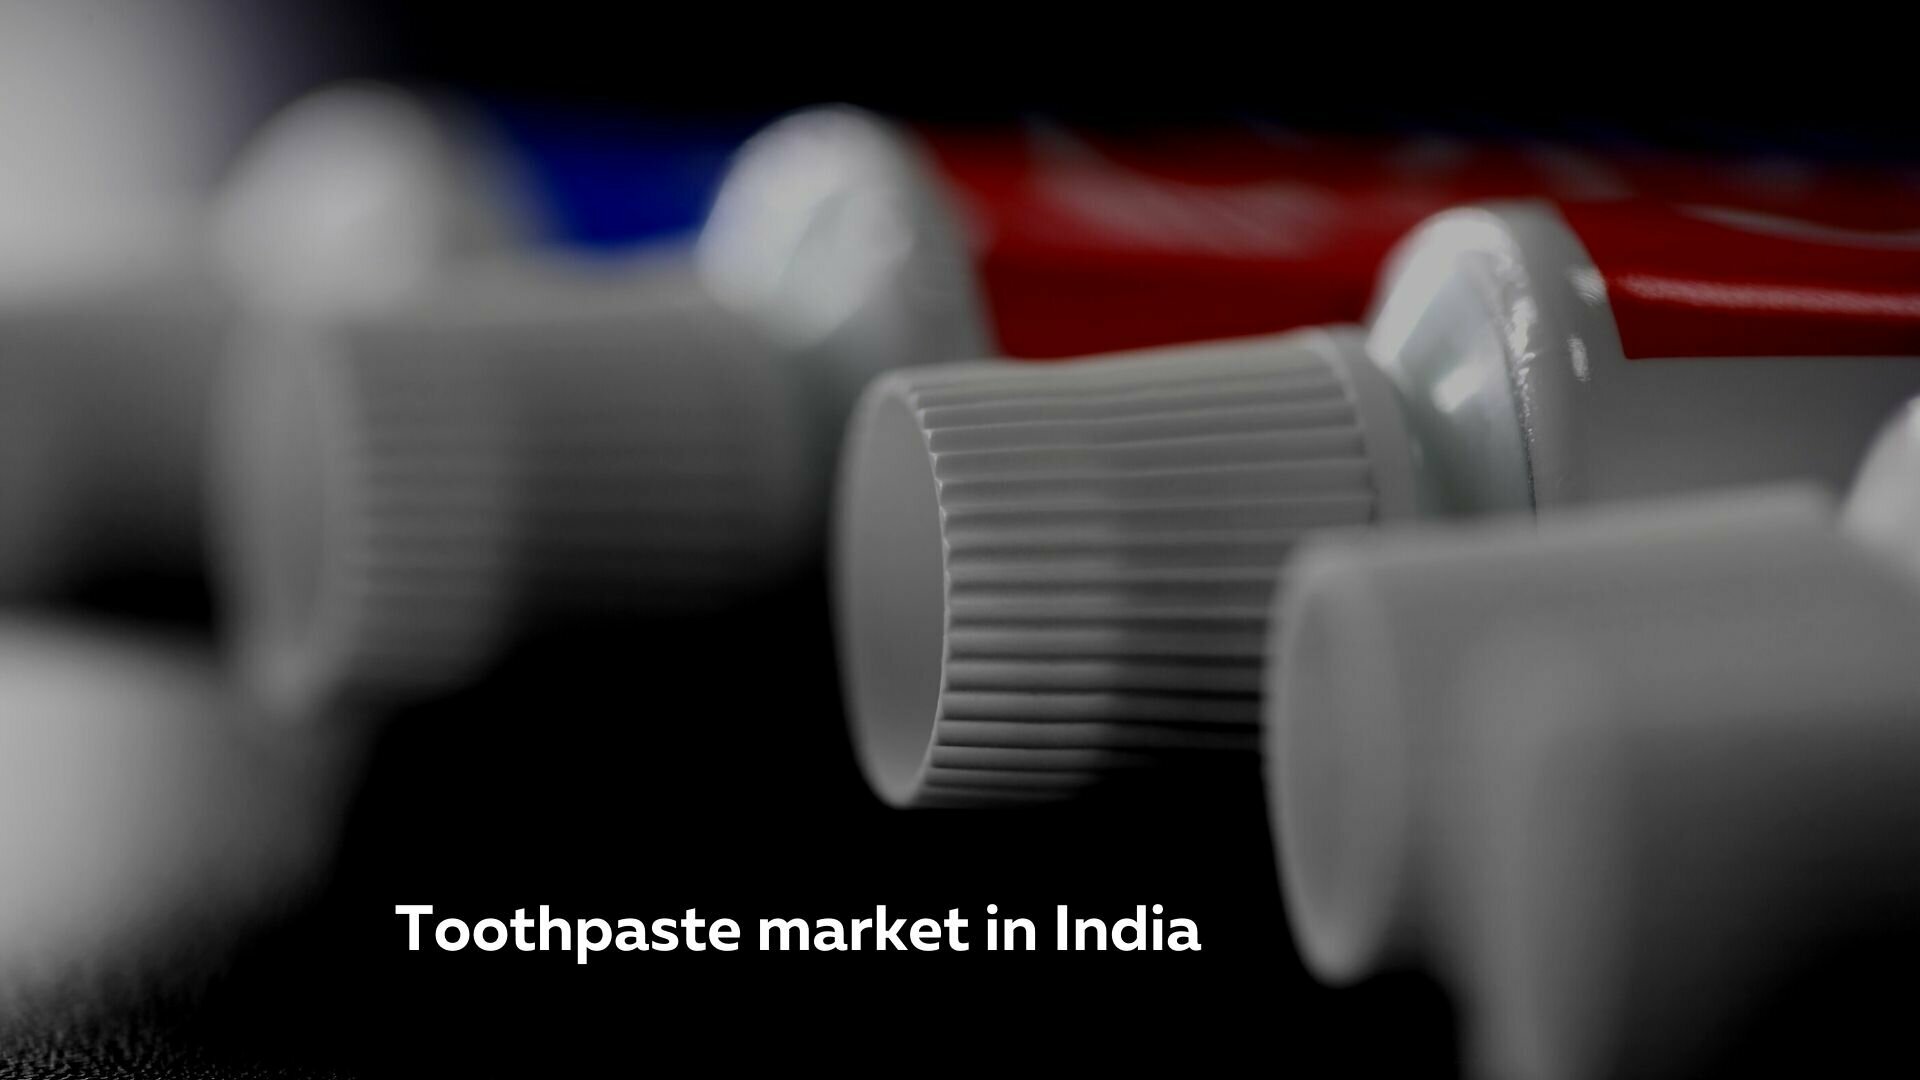 Here's the analysis of toothpaste market in India